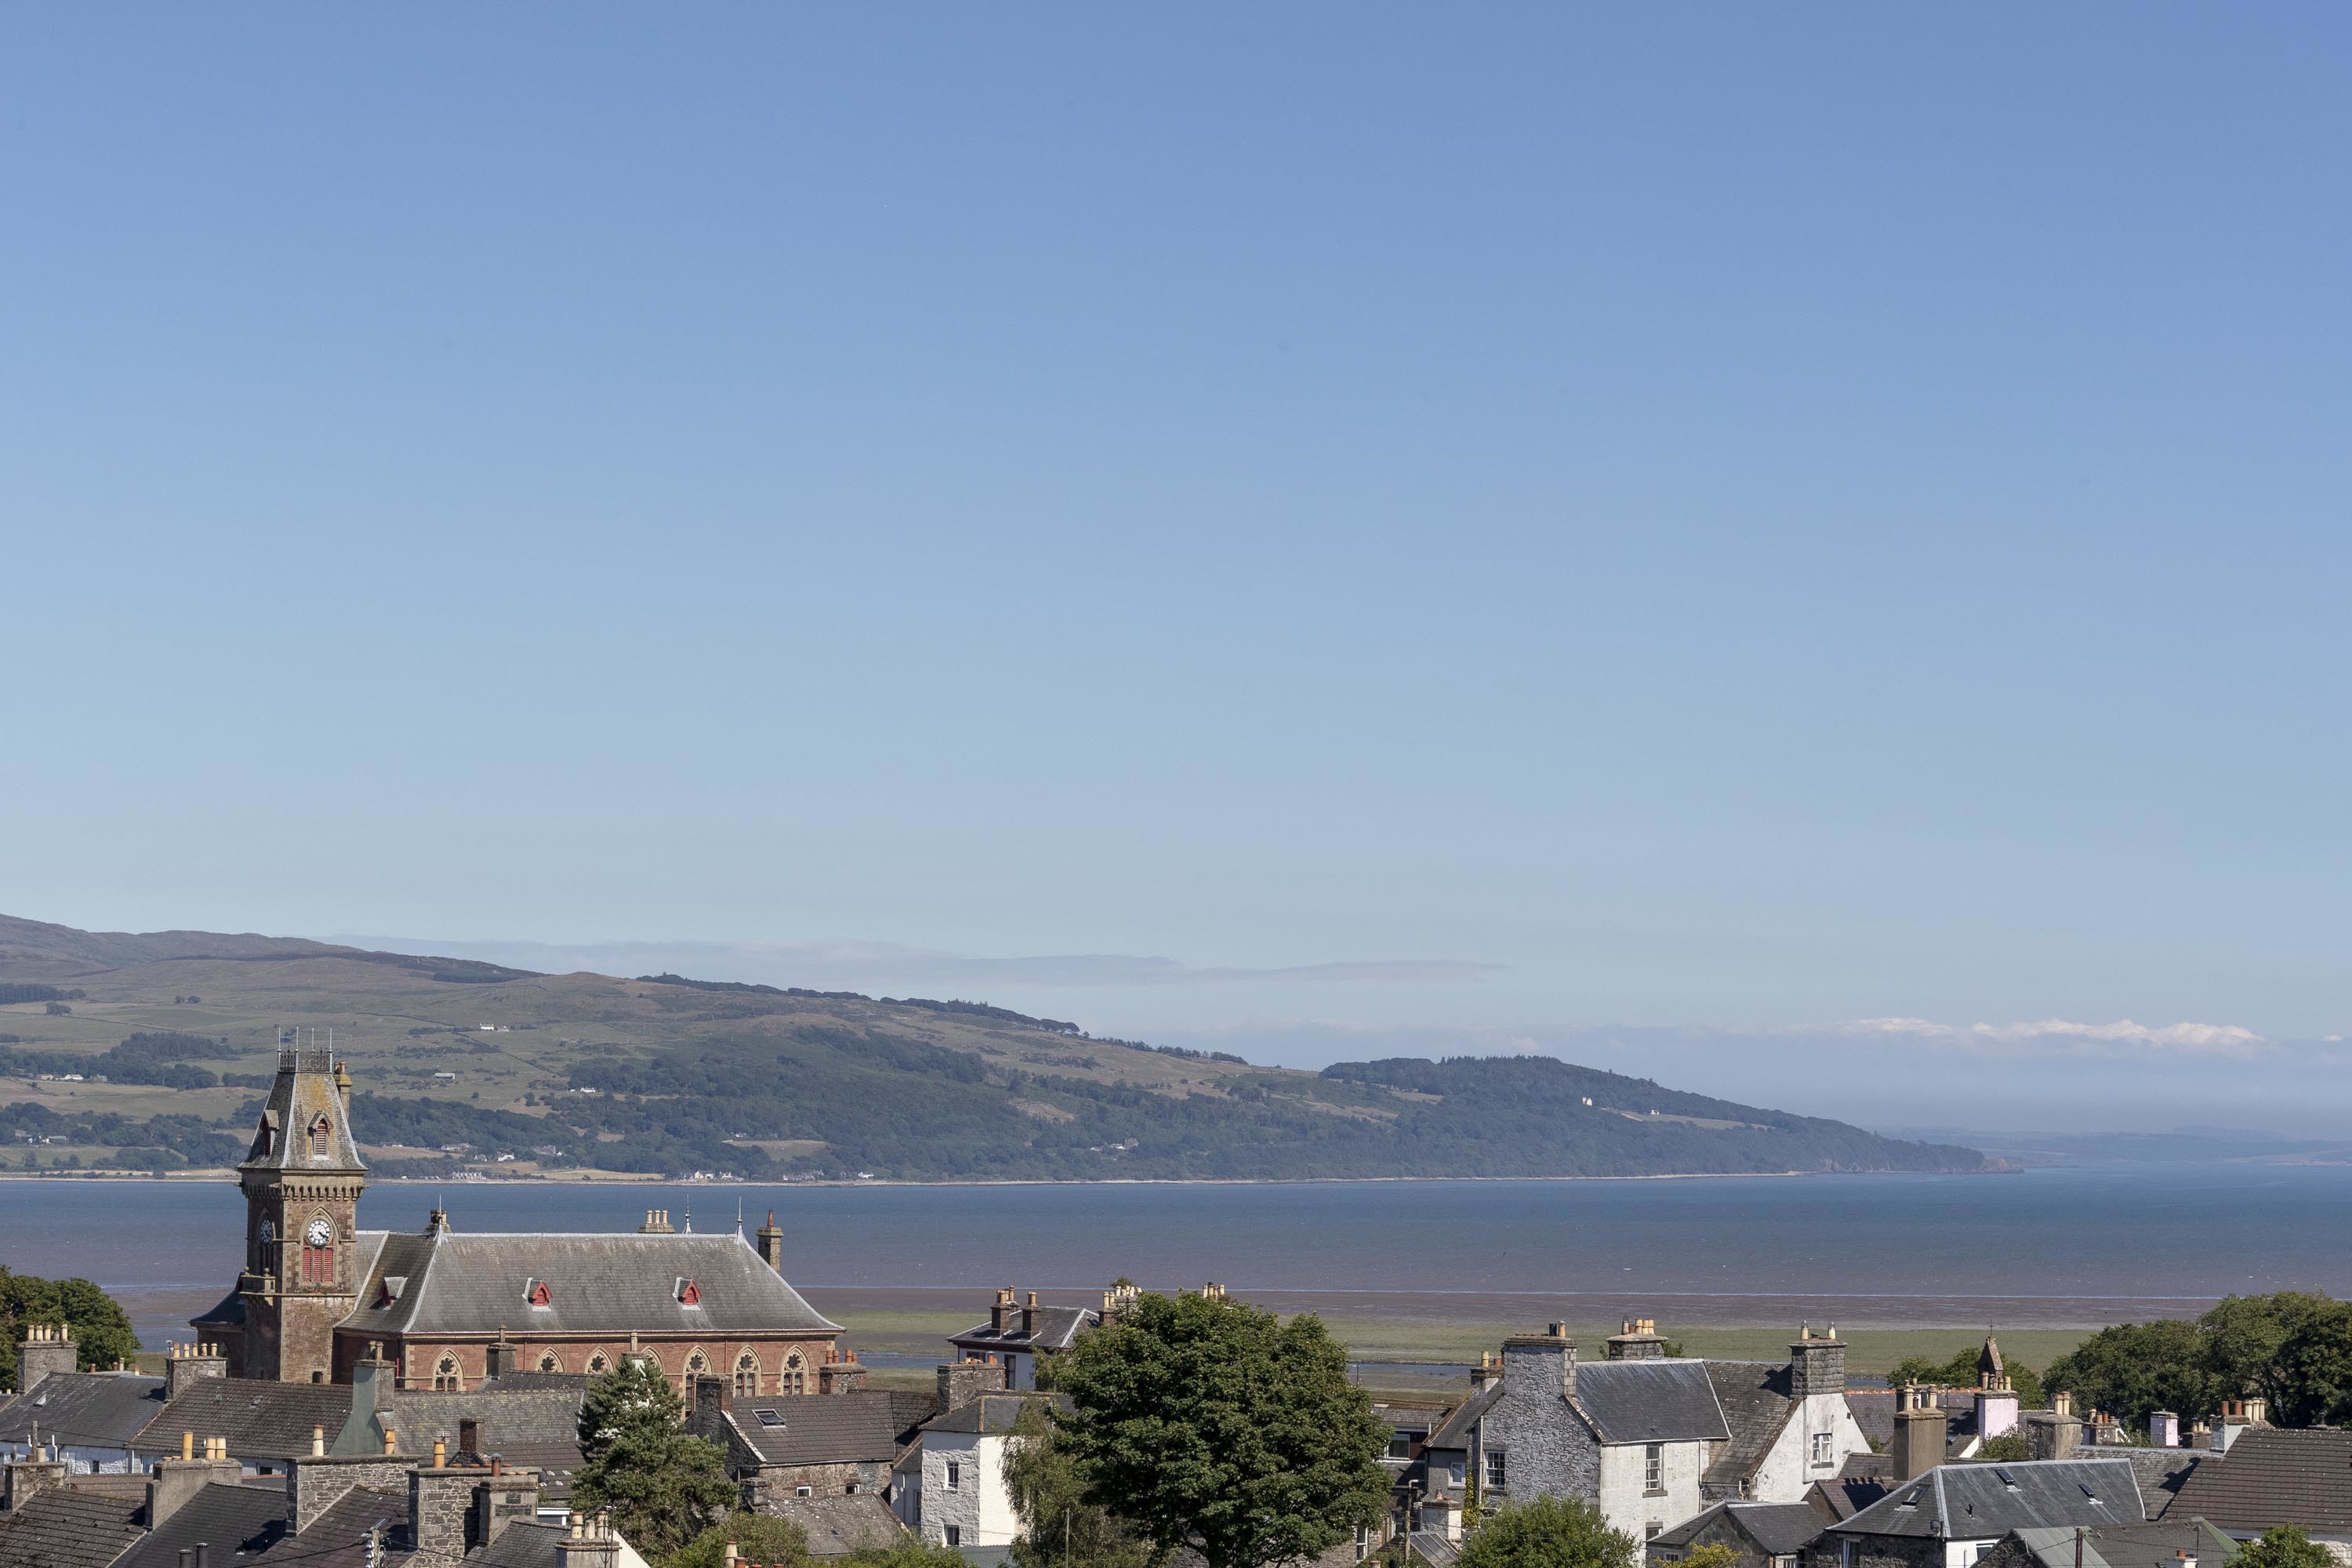 A view over the rooftops of Wigtown towards the Cree estuary and Wigtown Bay. The County Buildings, a red sandstone building with a large clock tower is prominent.